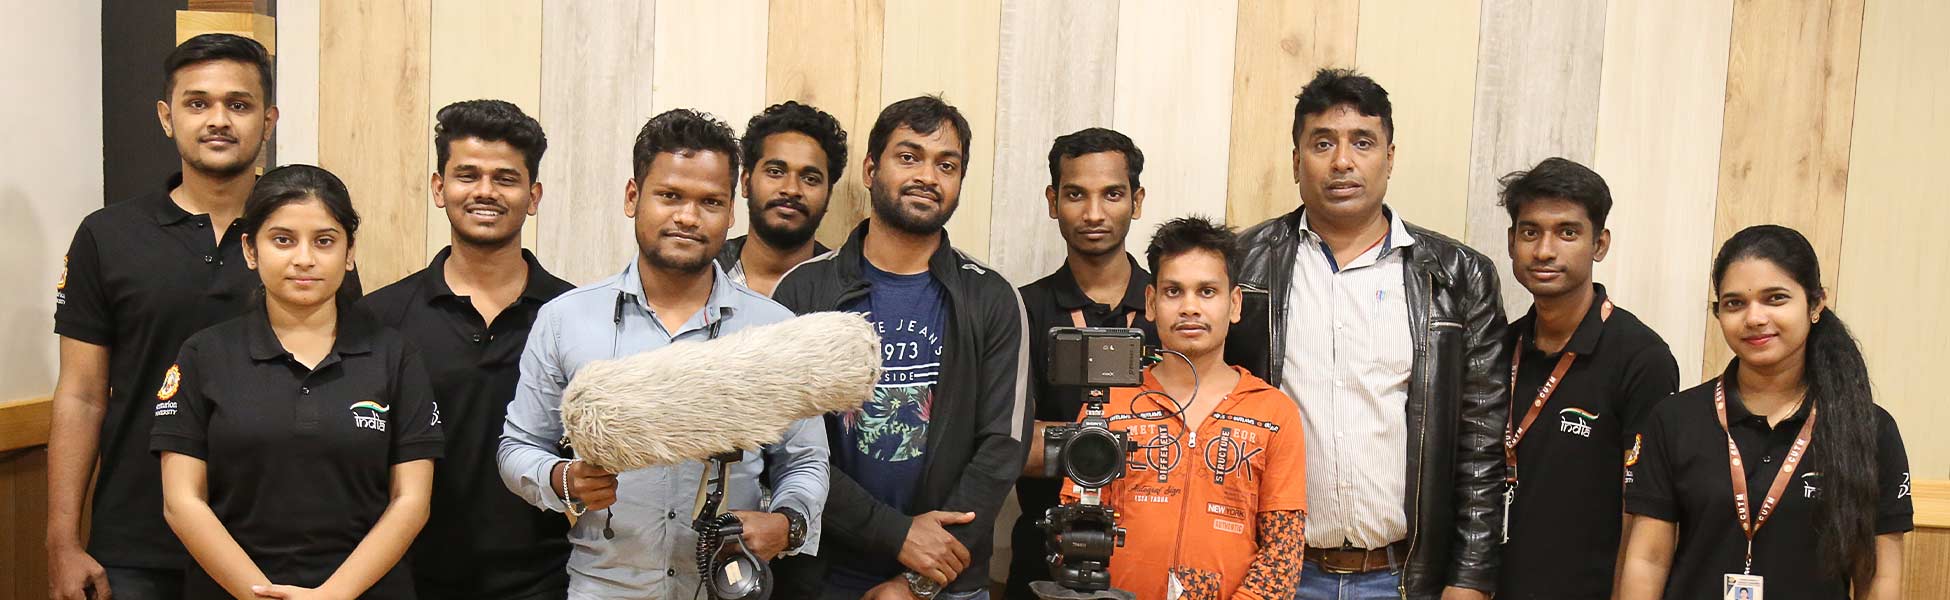 filmmaking workshop in india, cinematography workshop in india, camera workshop in india, editing workshop in india, vfx workshop in india, animation workshop in india, photography workshop in india, direction workshop in india, script writing workshop in india